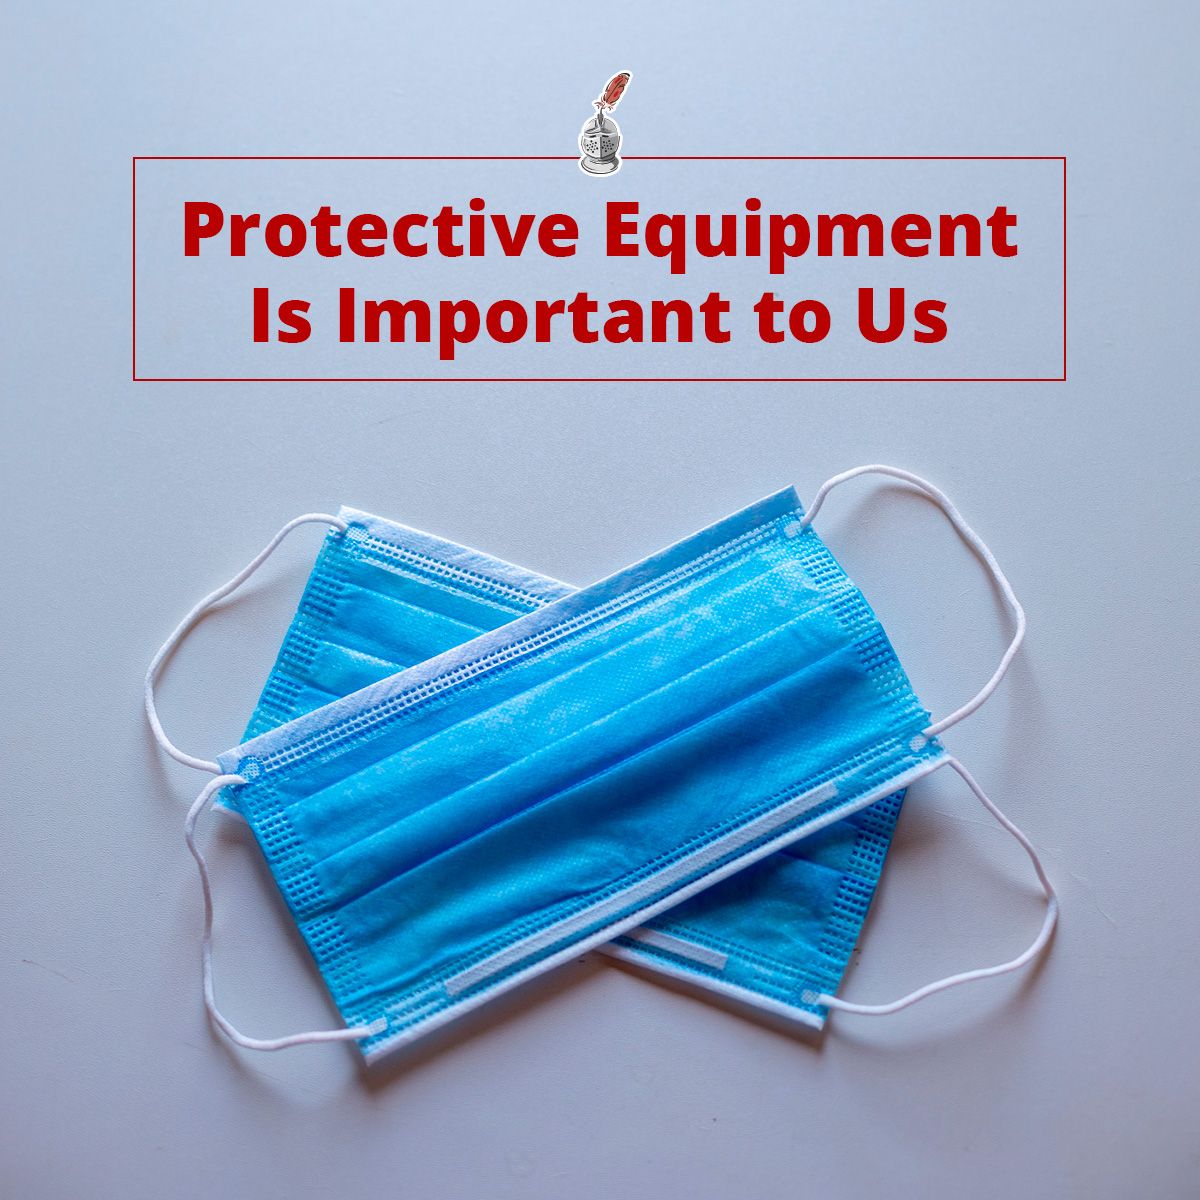 Protective Equipment Is Important to Us